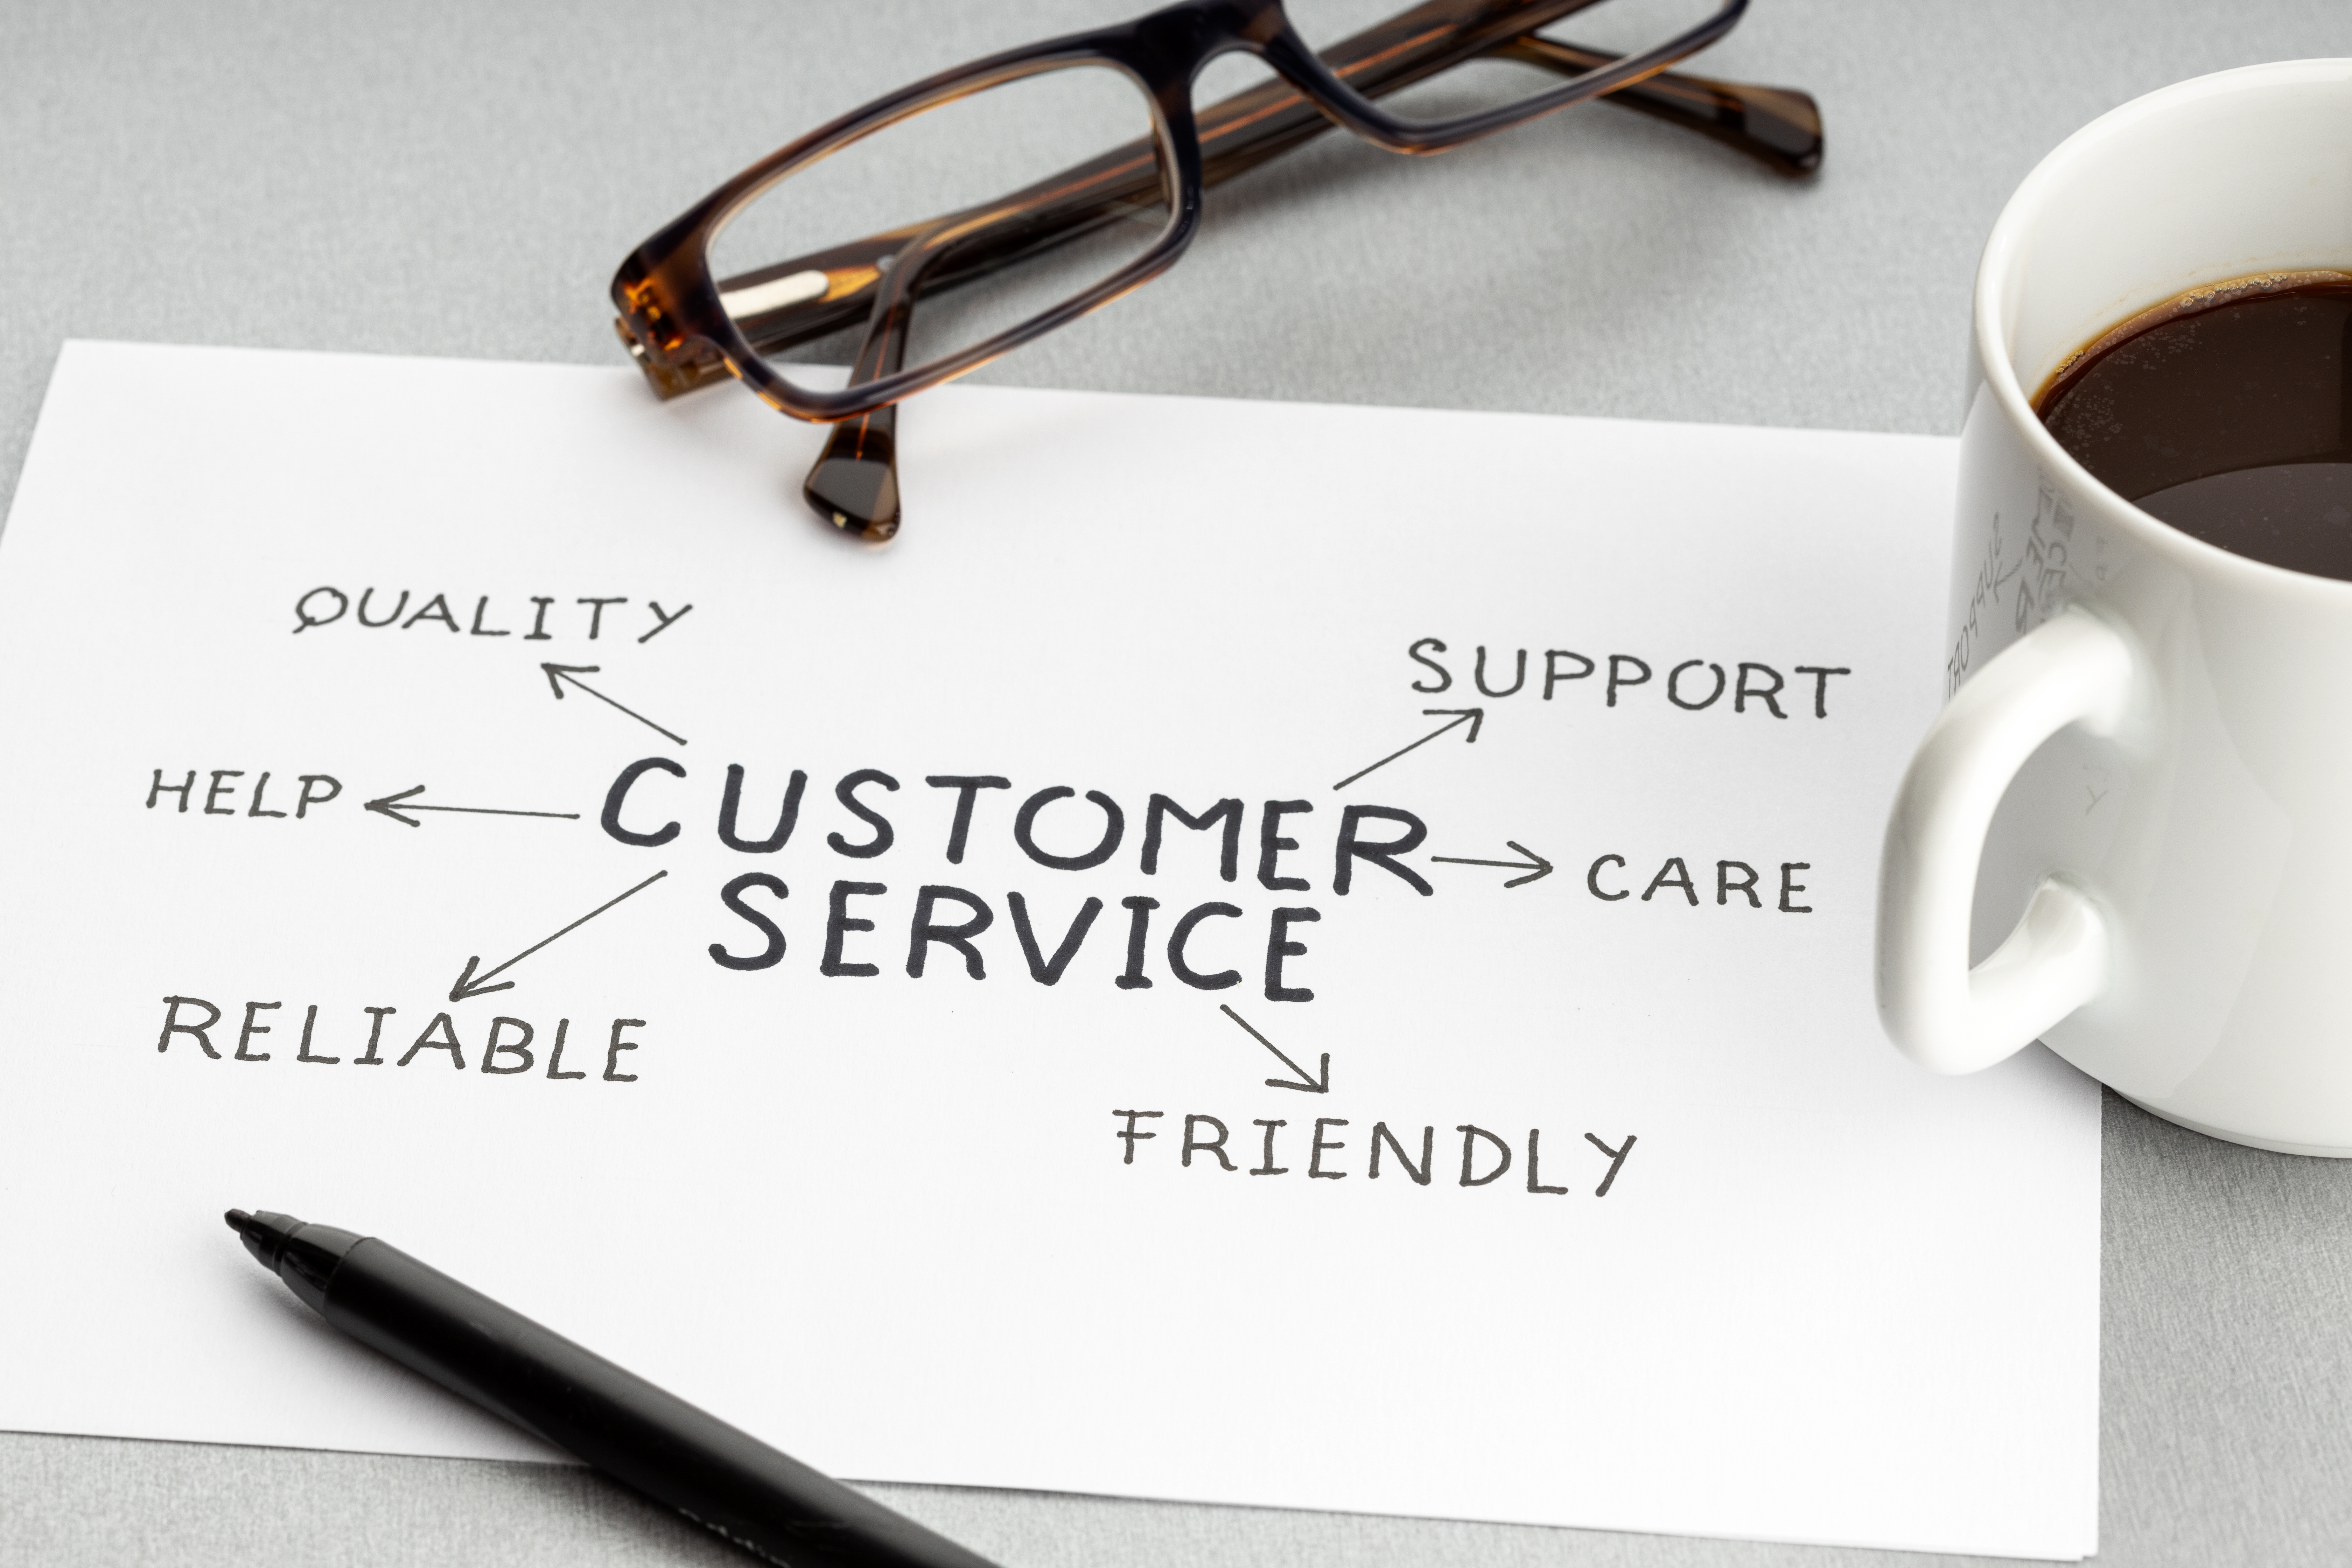 Wanting to make a lasting impression? Use these pointers ramp up your customer service